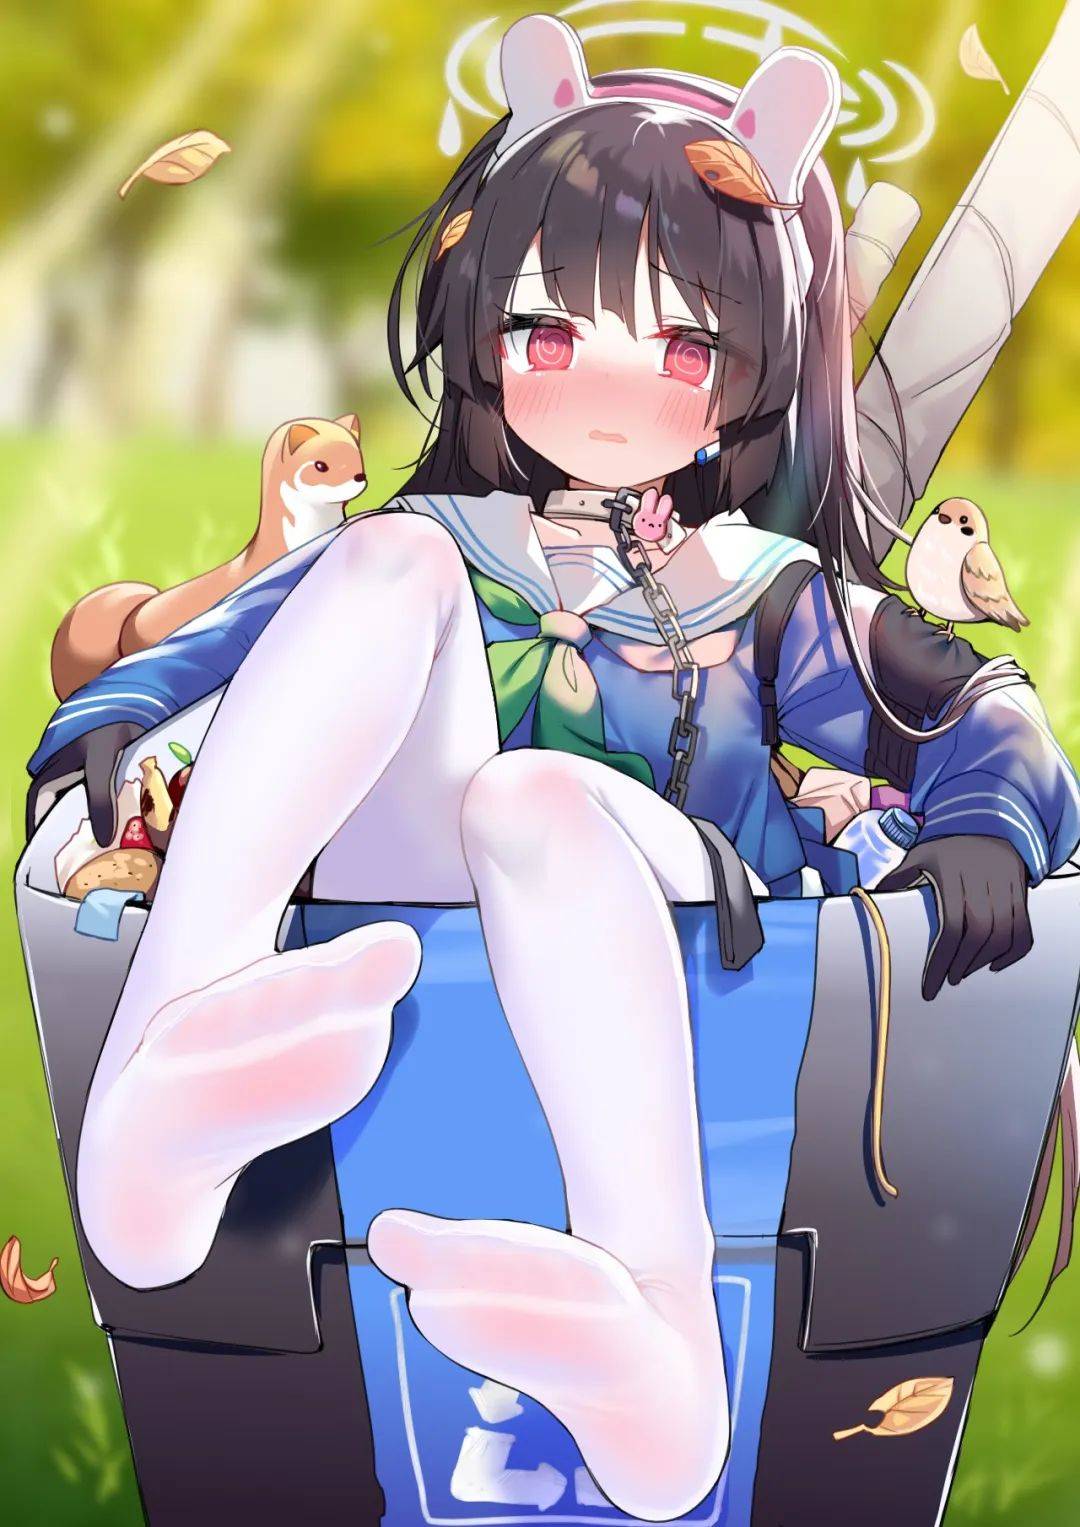 Anime 1080x1527 anime girls foot fetishism Miyu Kasumizawa feet Blue Archive sunlight portrait display blushing Recycle leaves bunny girl bunny ears birds looking at viewer blurred blurry background animals long hair collar trees